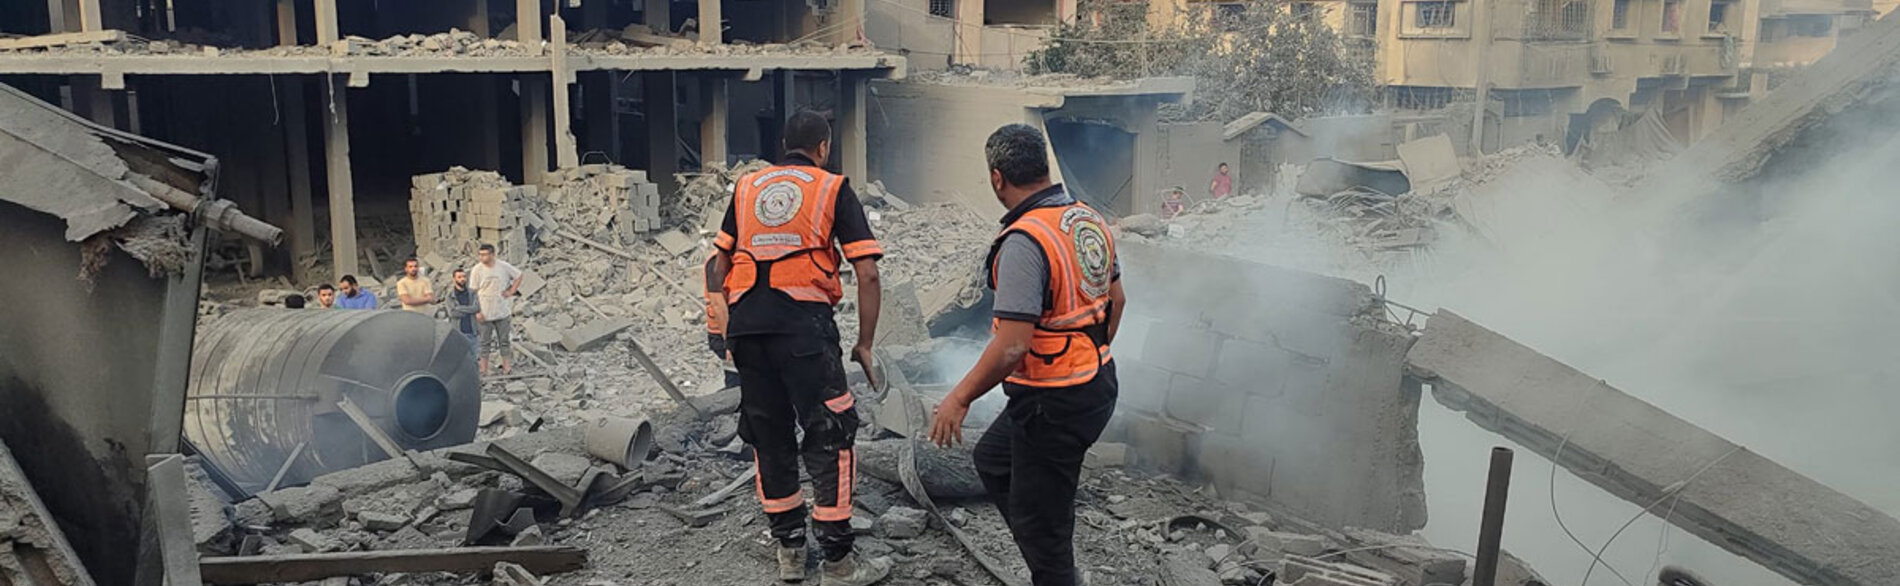 A Civil Defense team on a mission to rescue survivors and retrieve bodies from beneath the rubble in a residential area of Gaza. About 2,700 people, including some 1,500 children, have been reported missing. Eighteen Palestinian Civil Defense personnel have reportedly been killed since 7 October 2023. Photo by the Civil Defense, 2 November 2023.